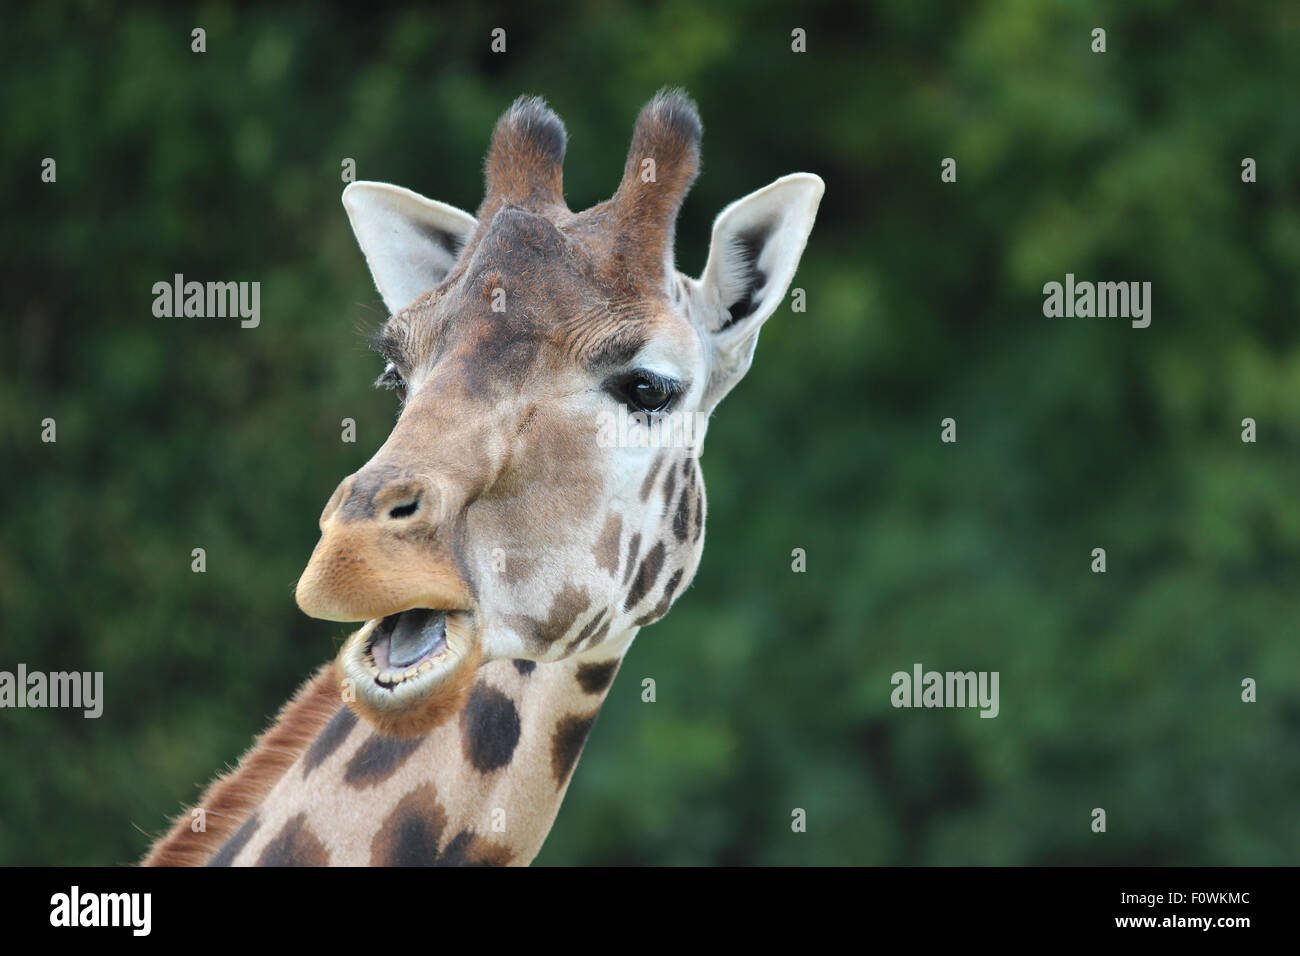 Giraffe with funny expression Stock Photo